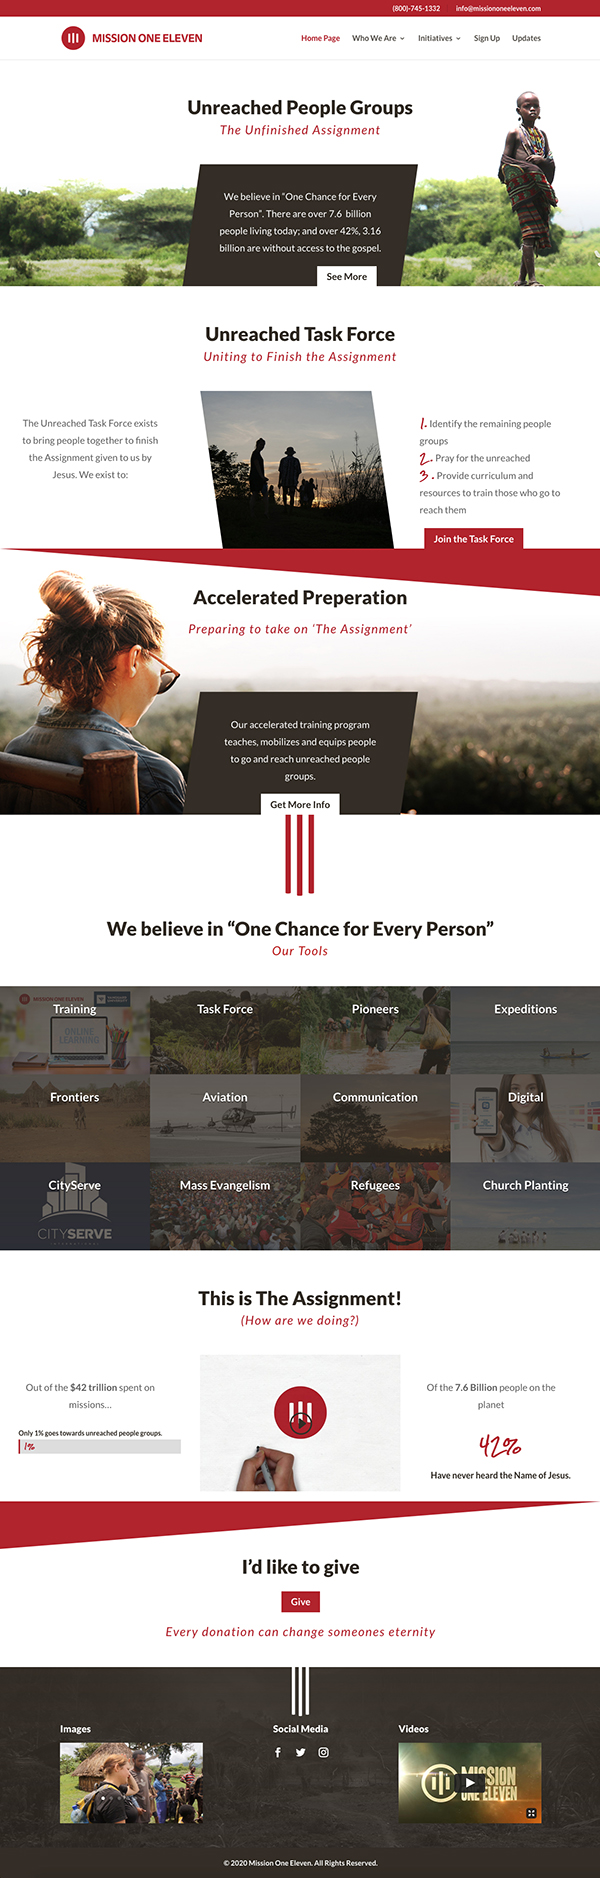 New website designed and developed for Mission One Eleven's new website design and development.